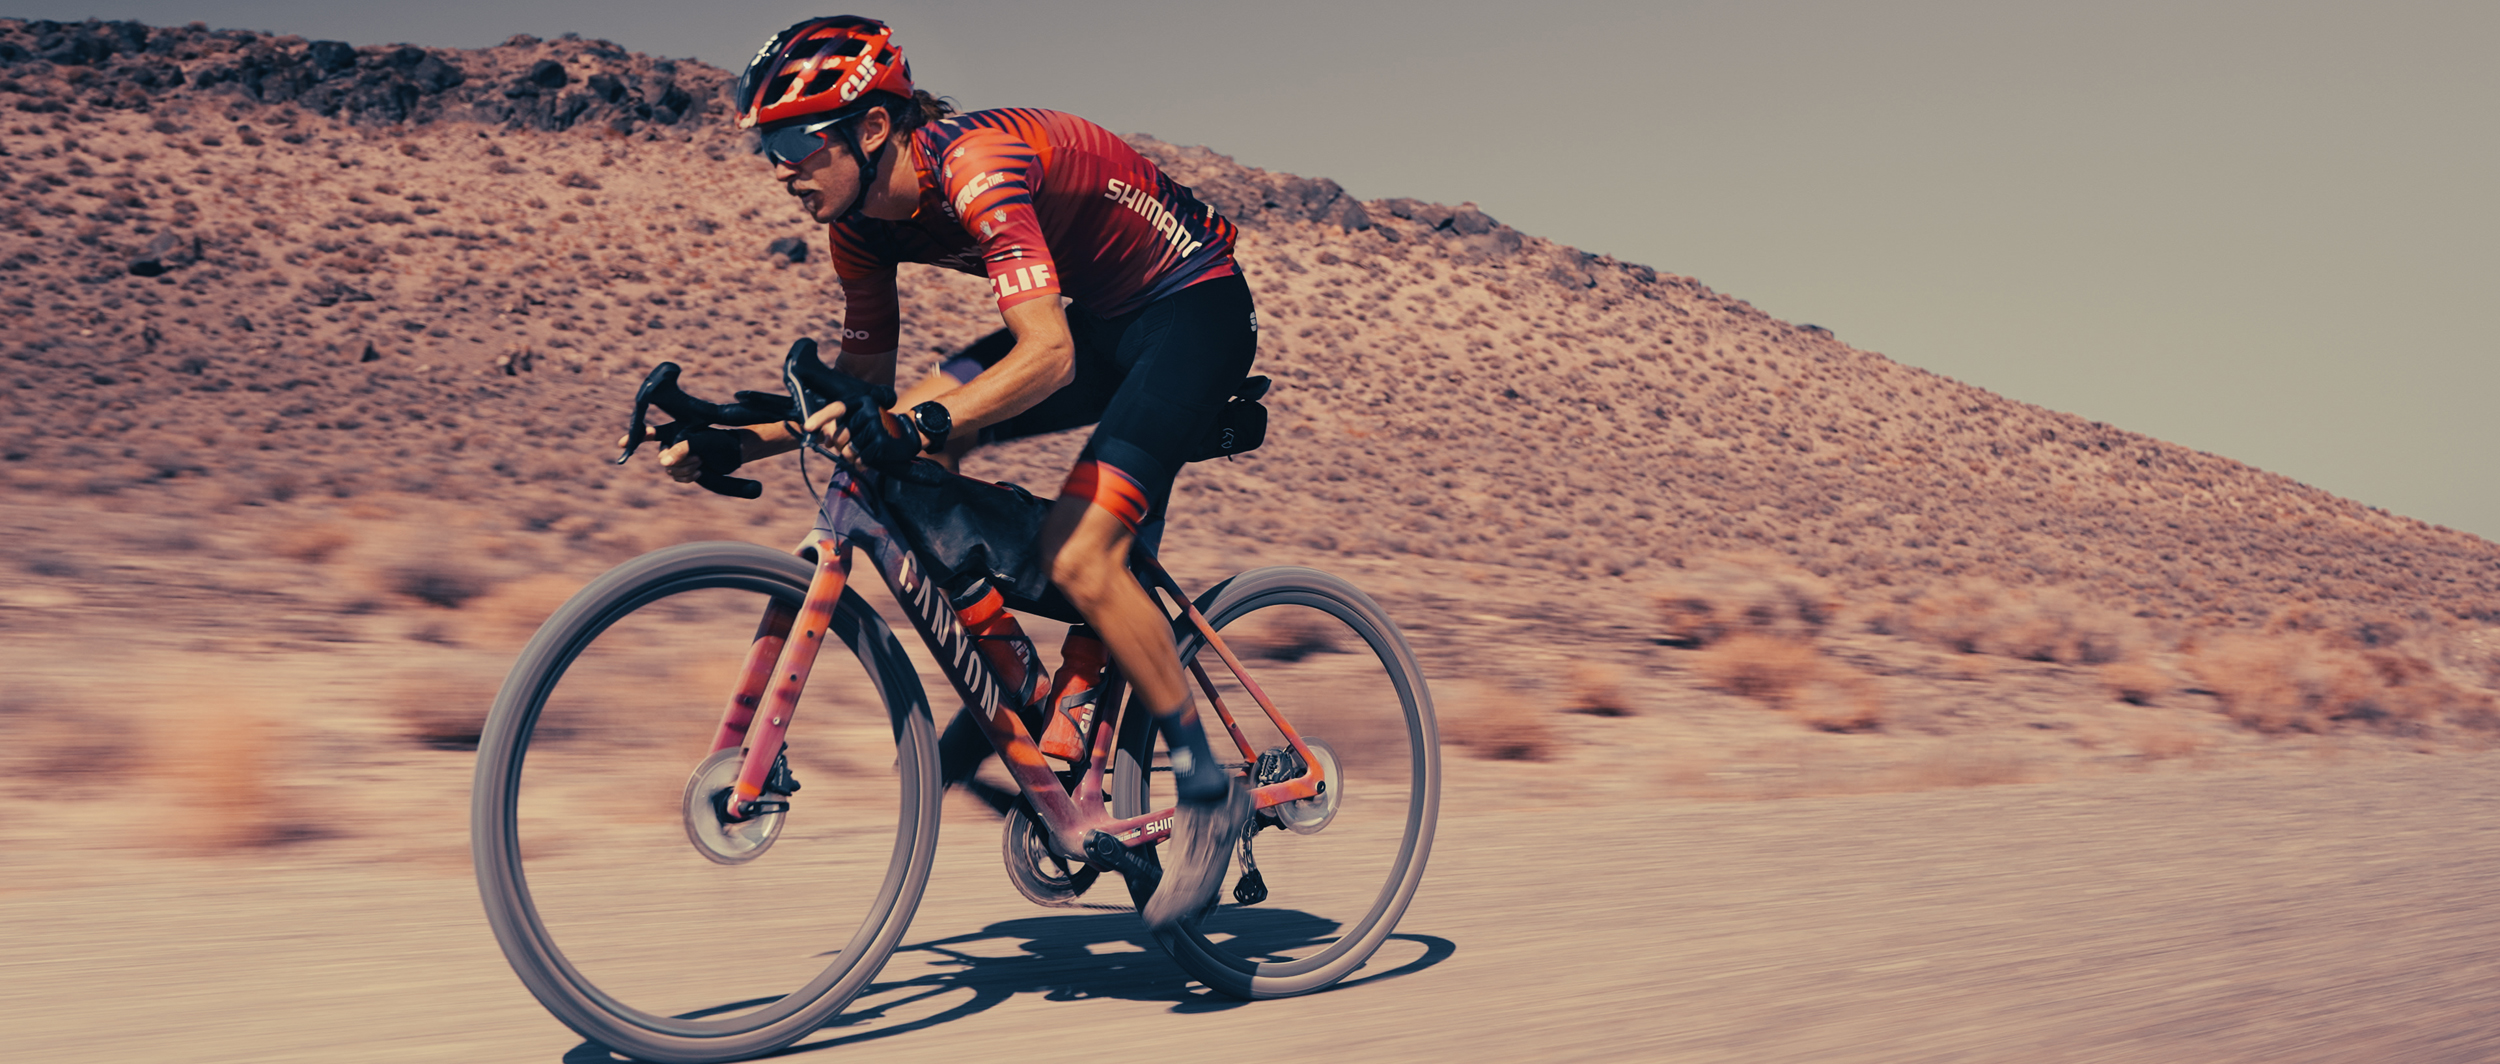 Peter Stetina riding gravel in Reno the art of Grind 